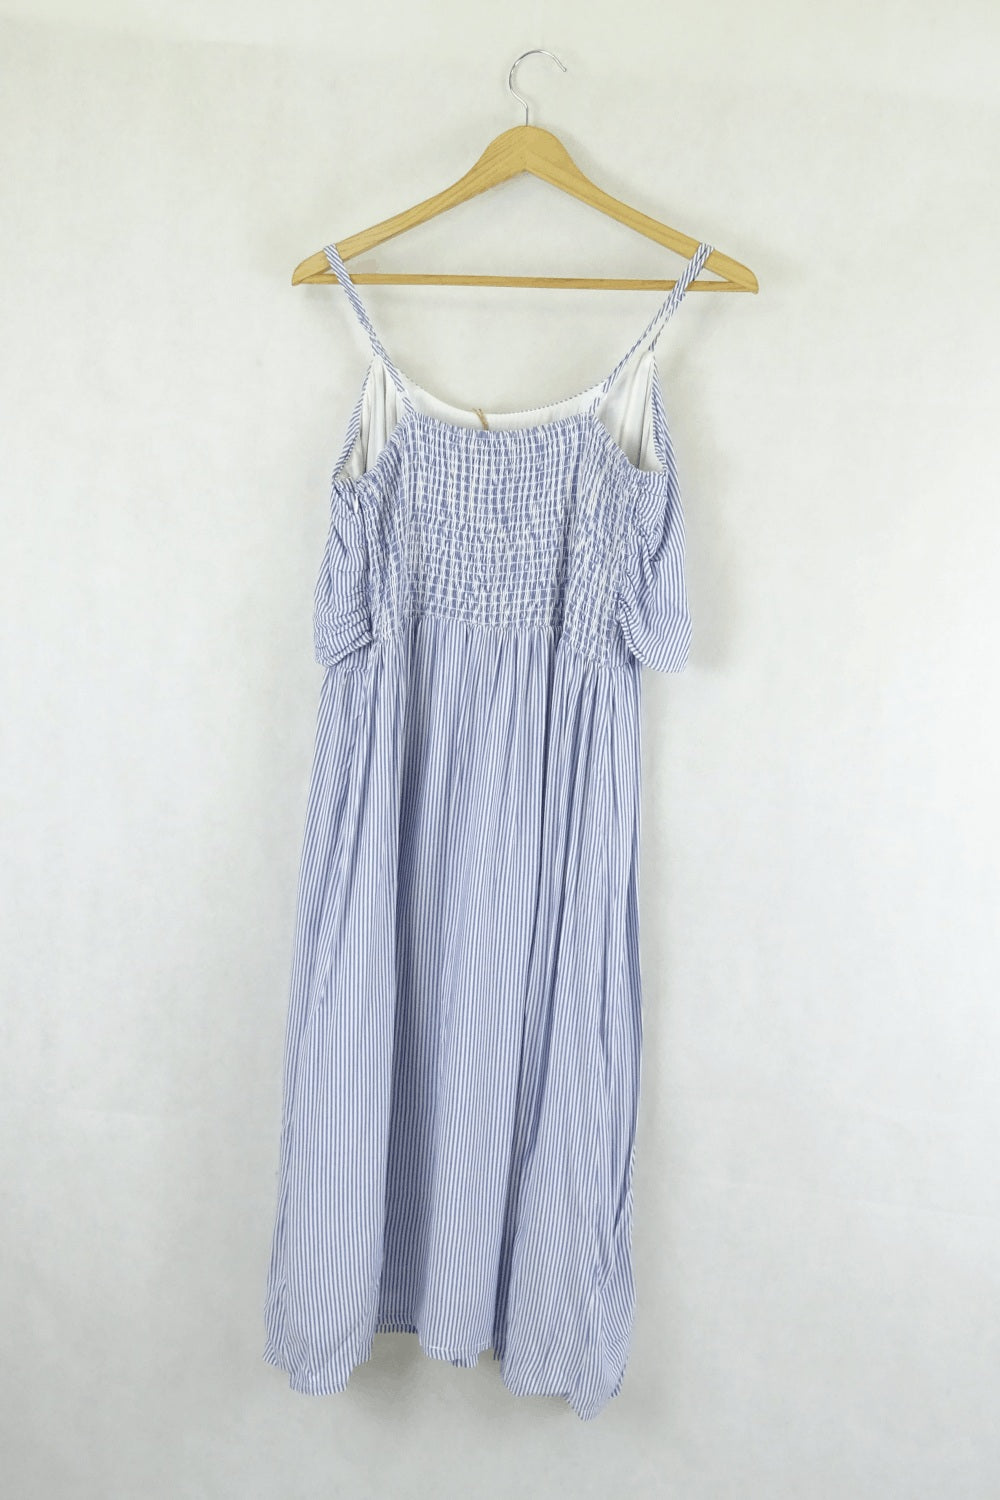 Just Jeans Blue And White Striped Dress 12